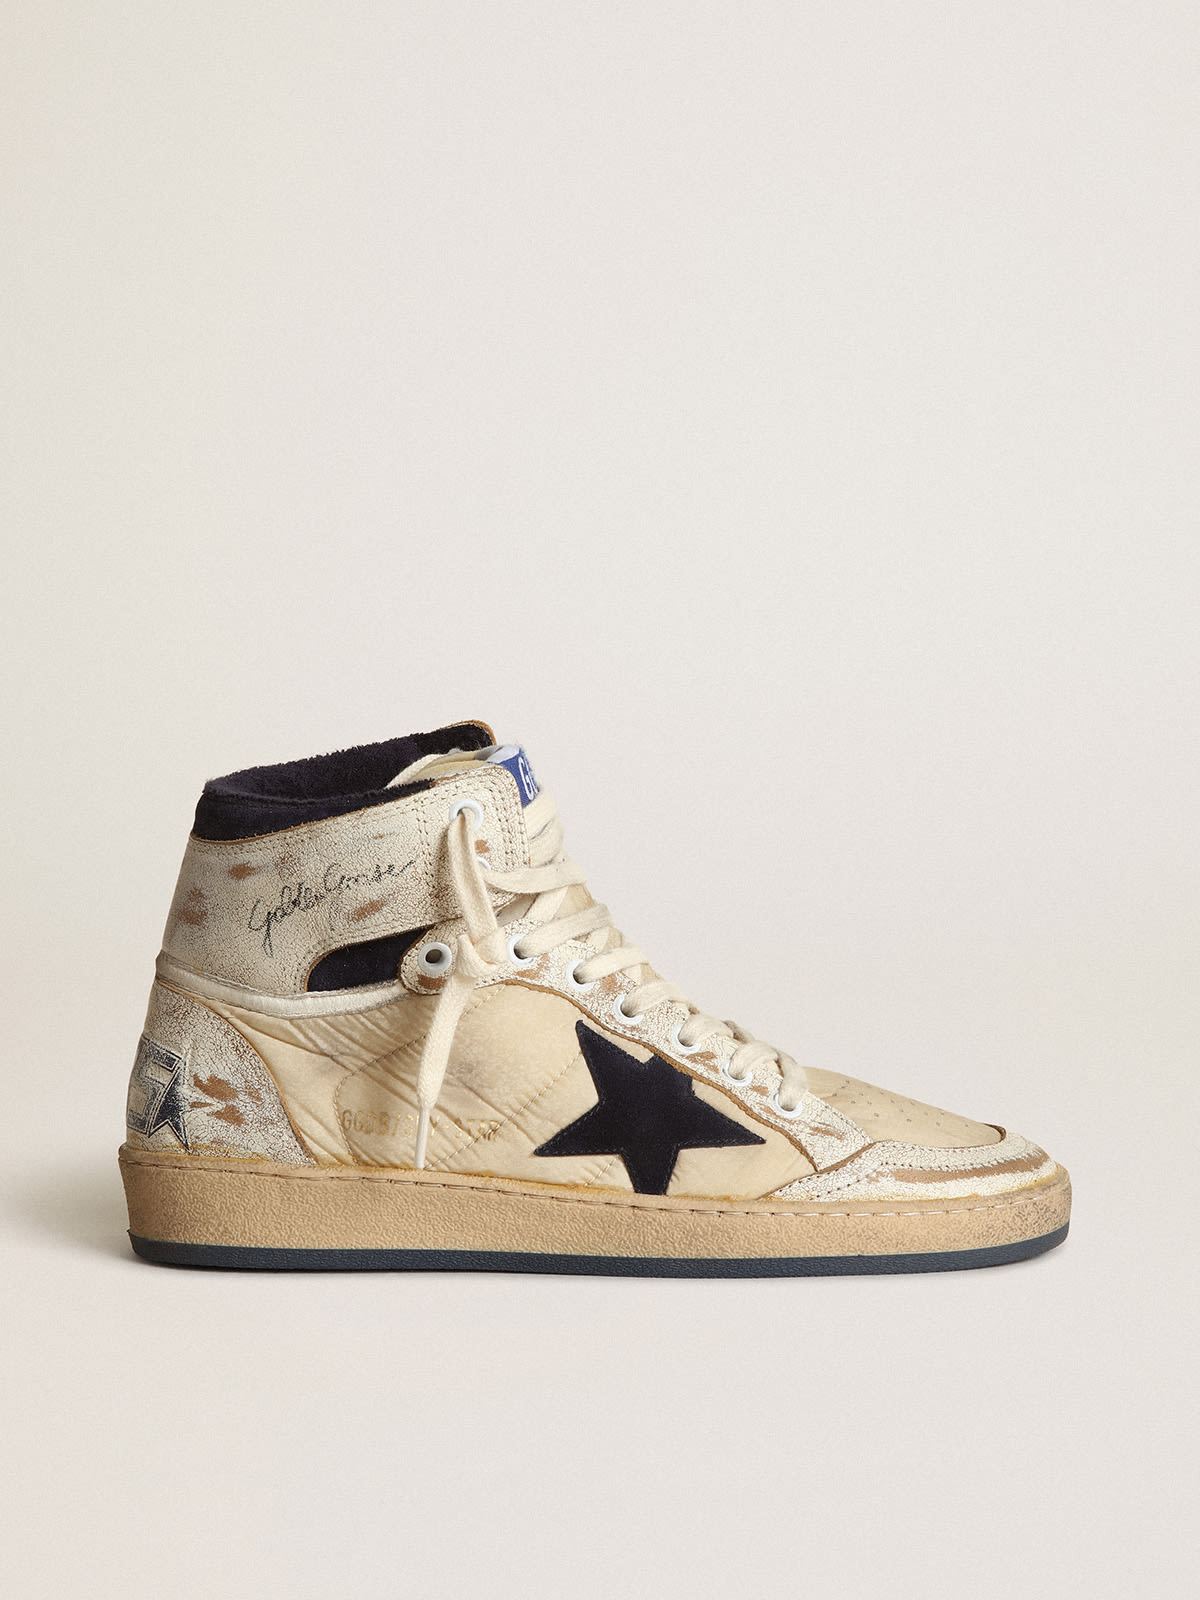 Golden Goose - Women's Sky-Star in cream-colored nylon and white leather in 